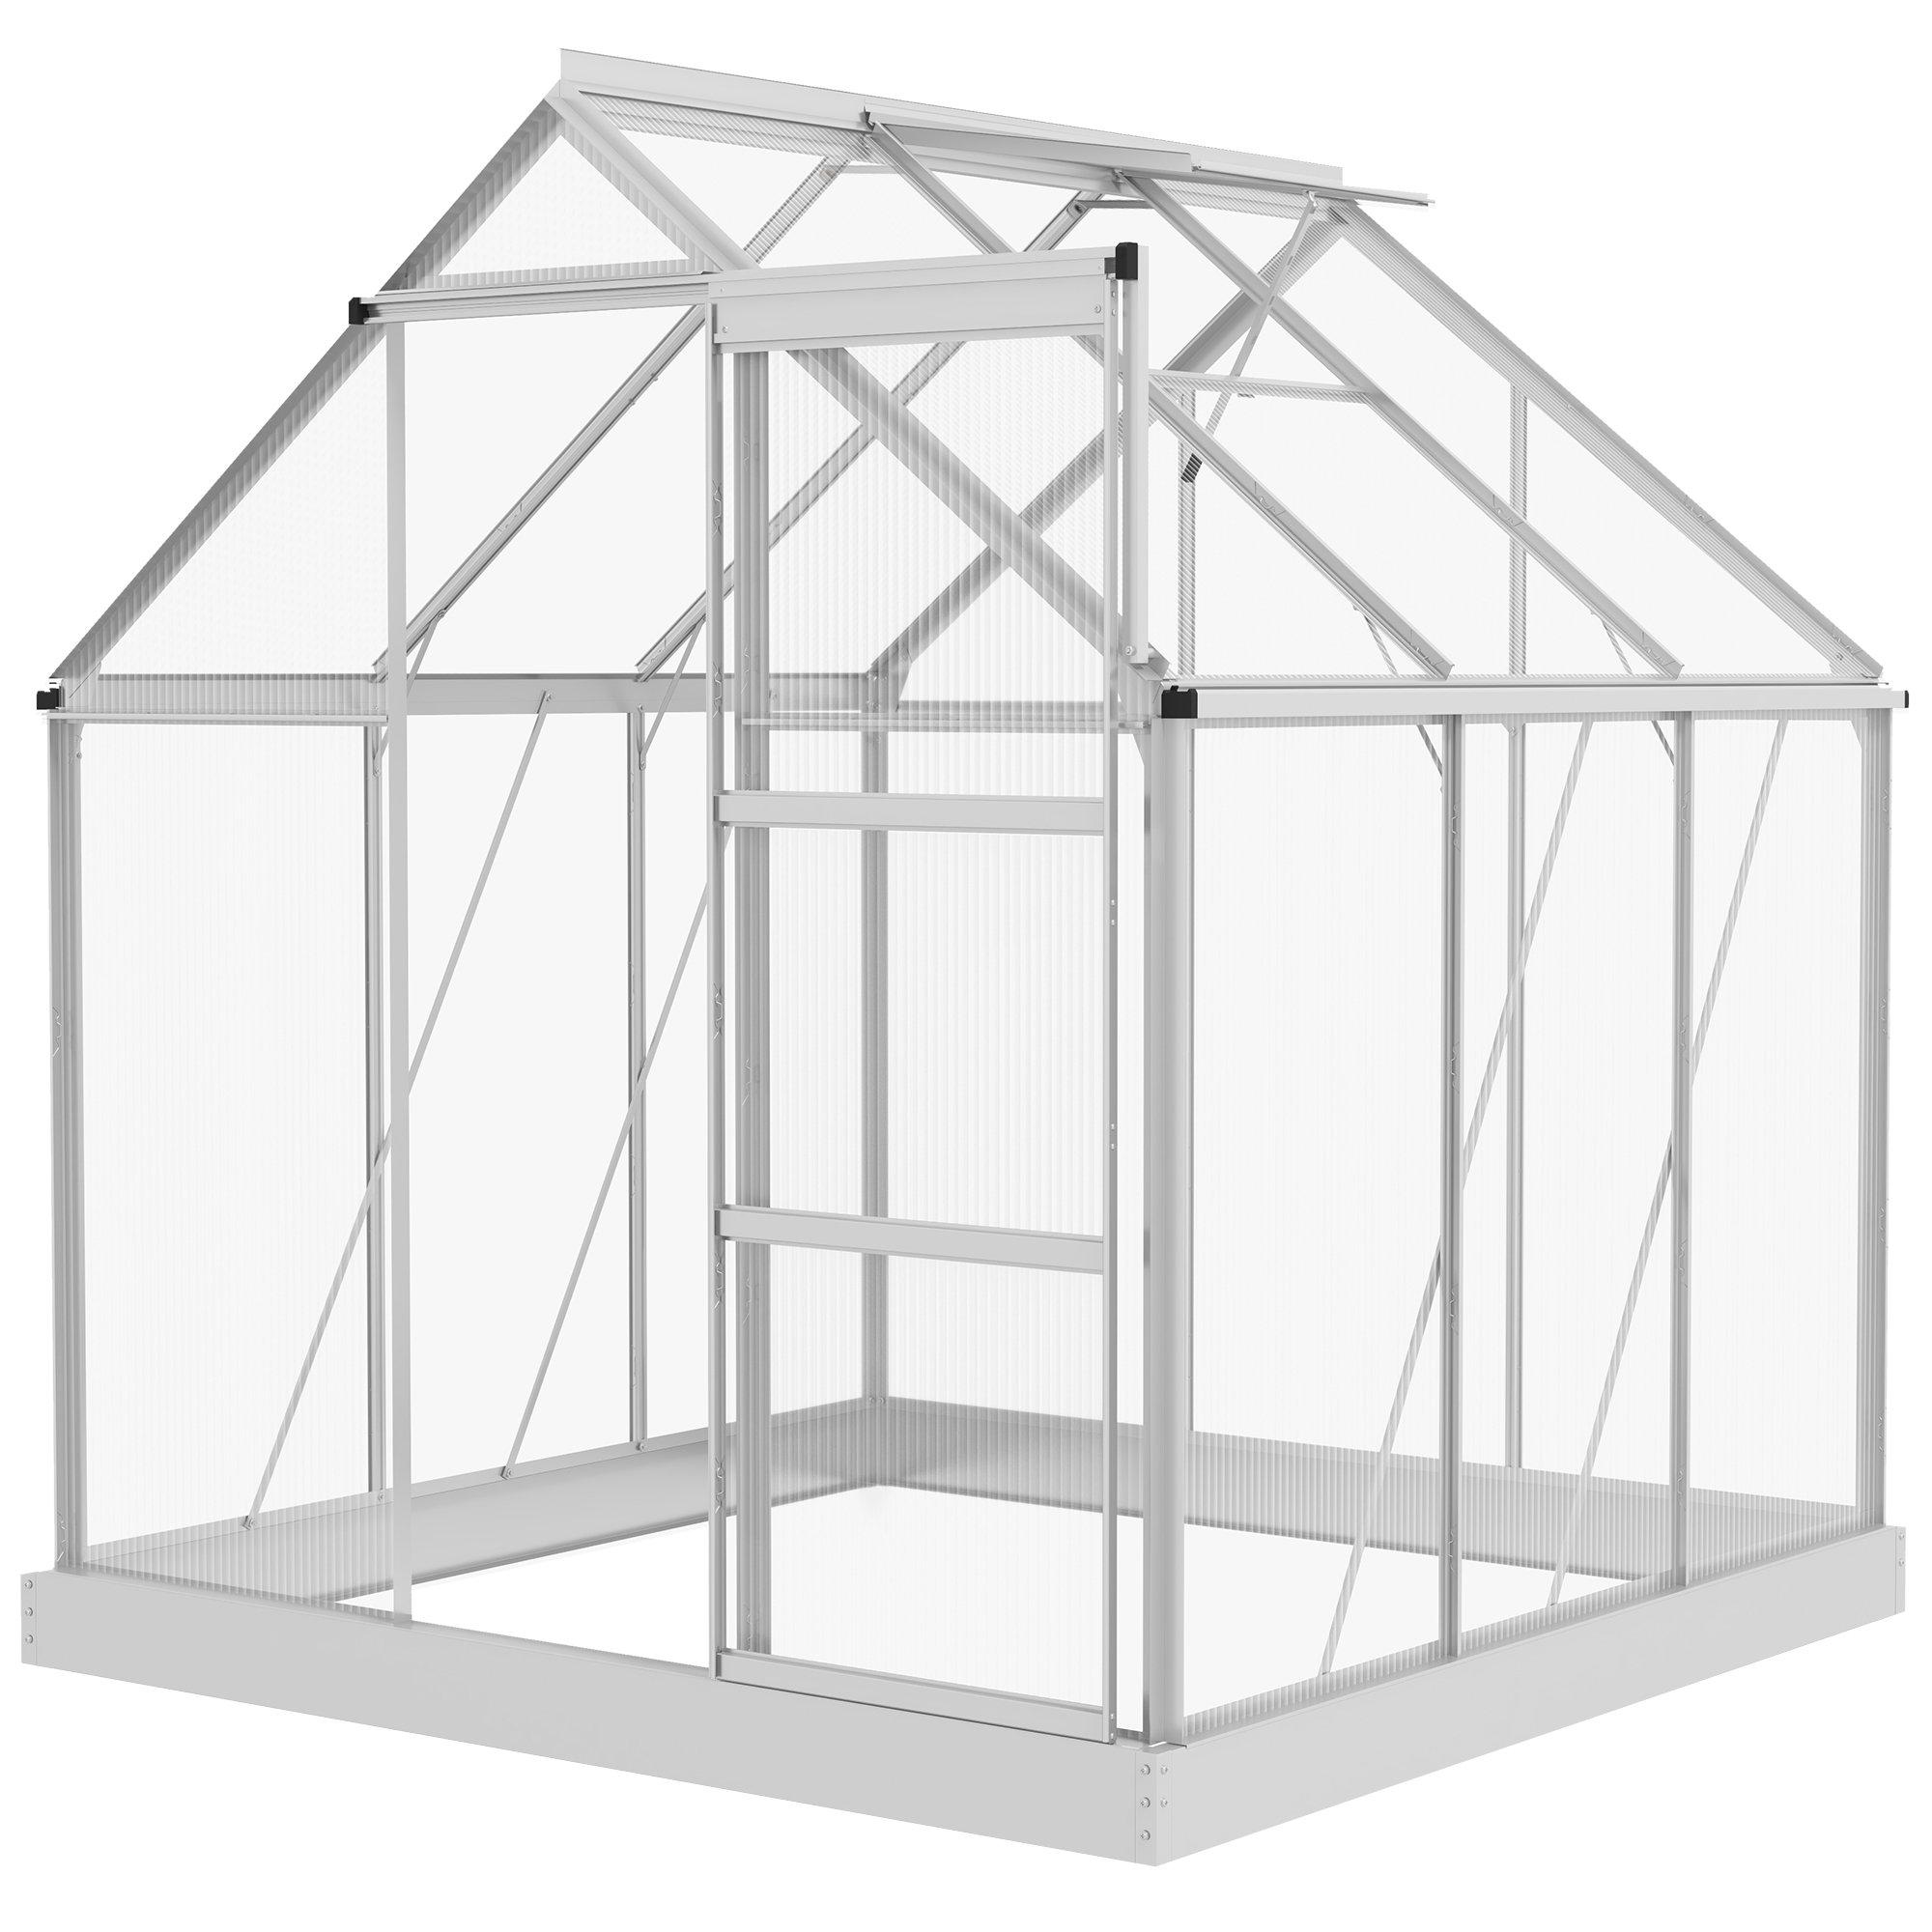 6 x 6ft Polycarbonate Greenhouse with Sliding Door Adjustable Roof Vent Silver